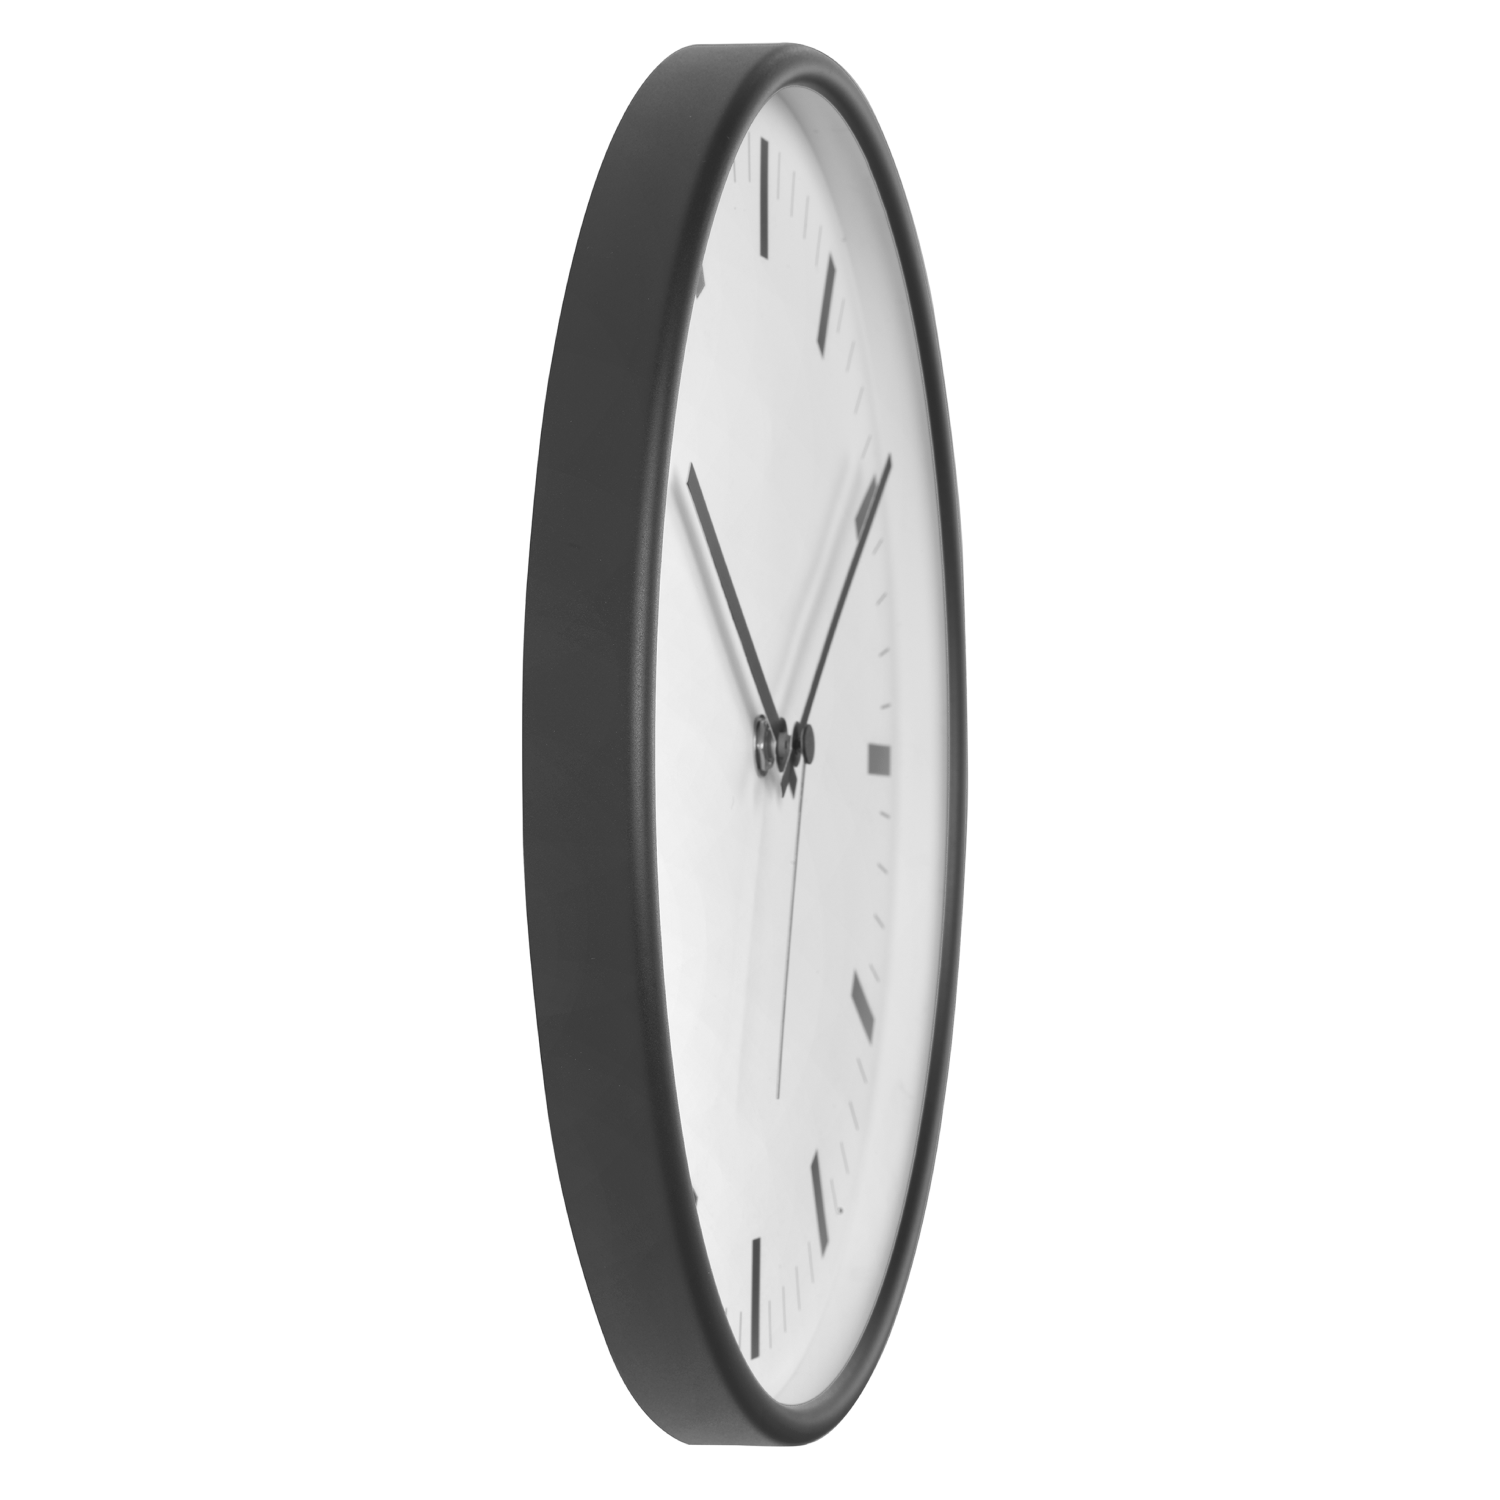 Promotional wall clocks made in Italy